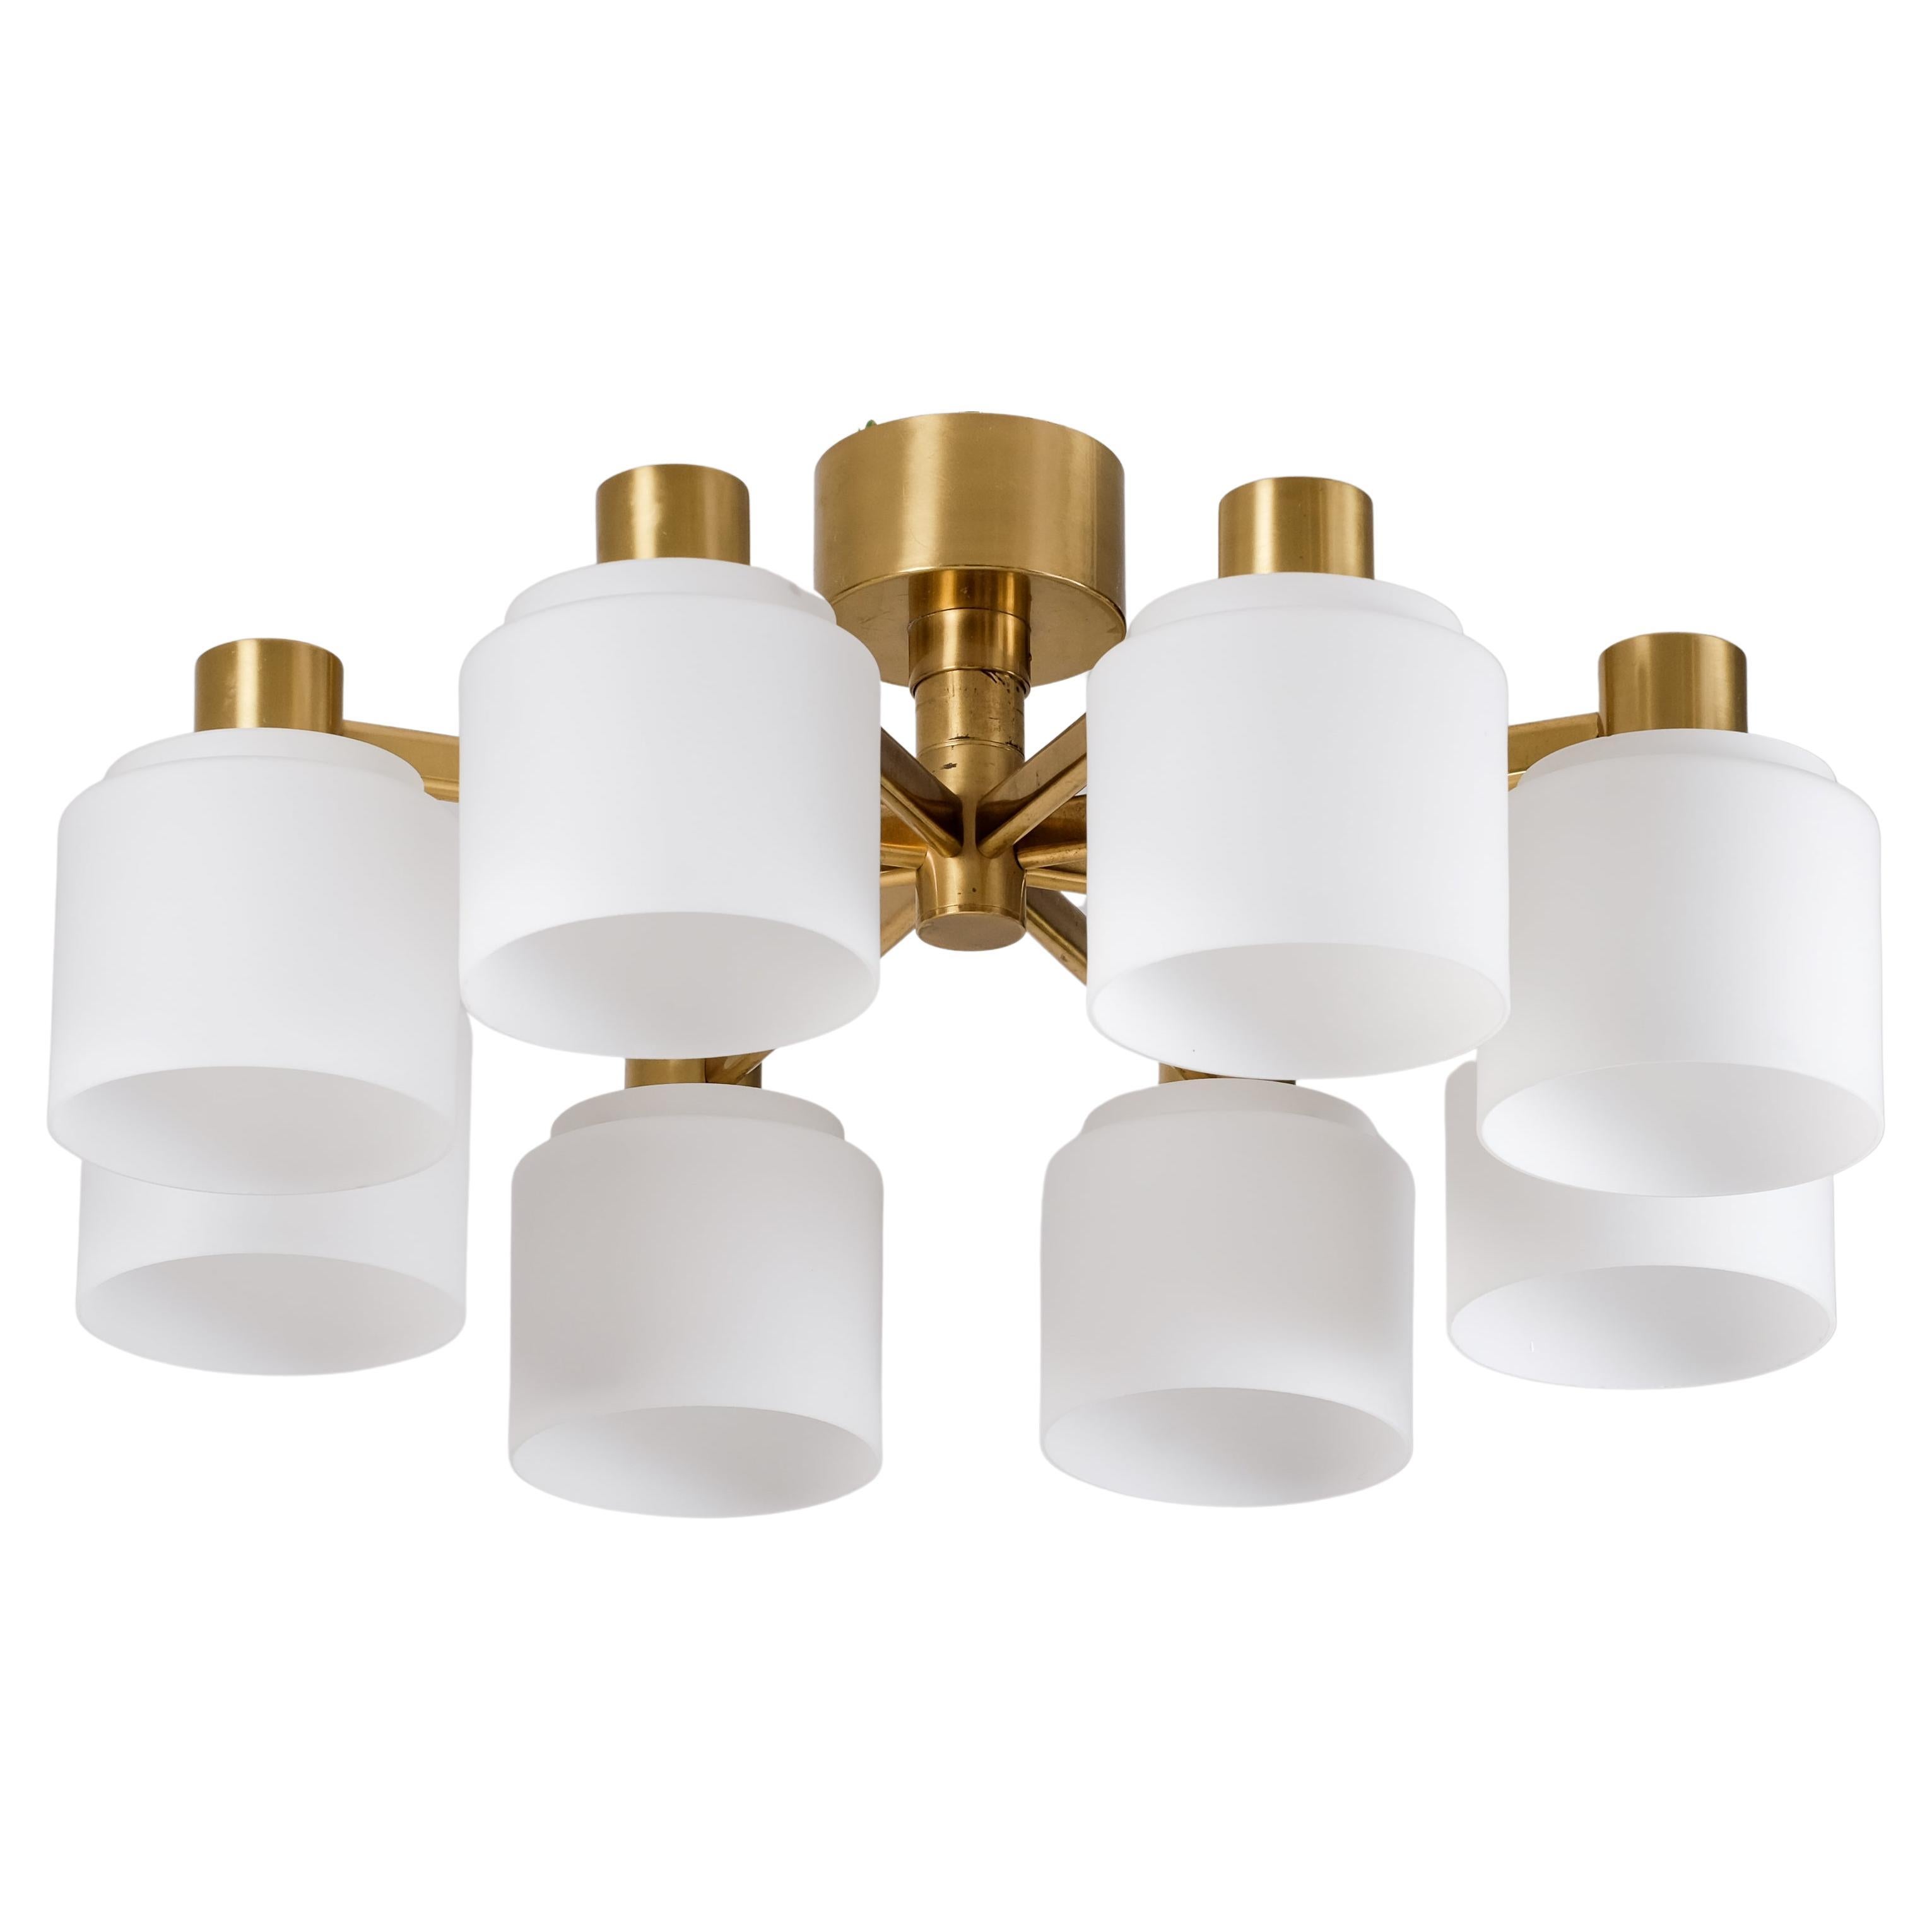 Set of 3 Swedish Ceiling Lights by Boréns, Sweden, 1960s For Sale